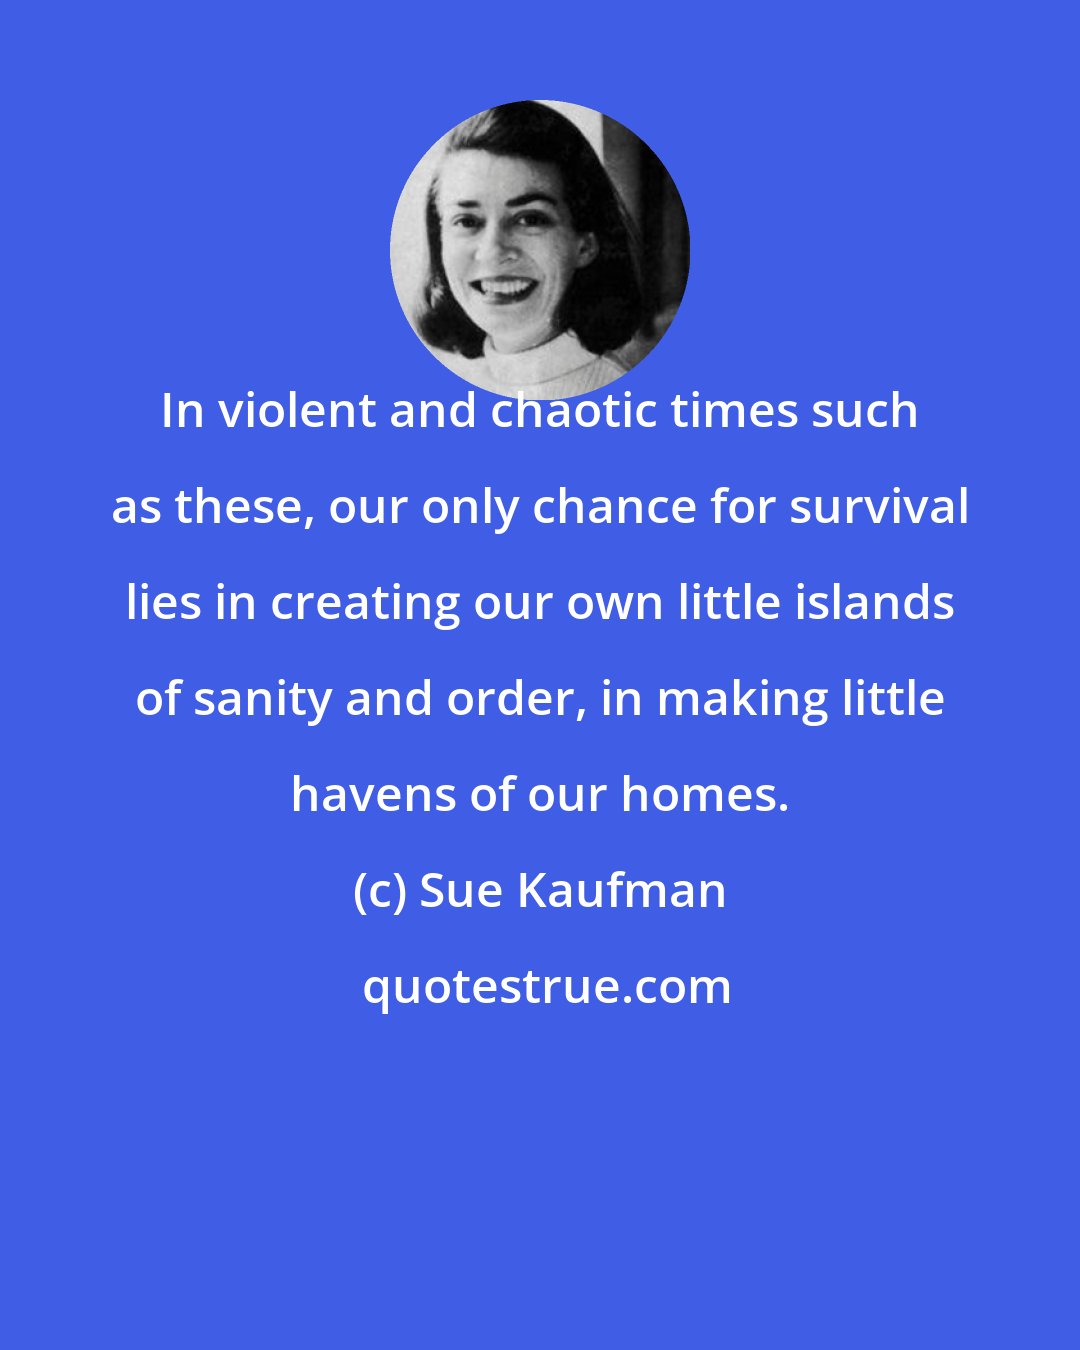 Sue Kaufman: In violent and chaotic times such as these, our only chance for survival lies in creating our own little islands of sanity and order, in making little havens of our homes.